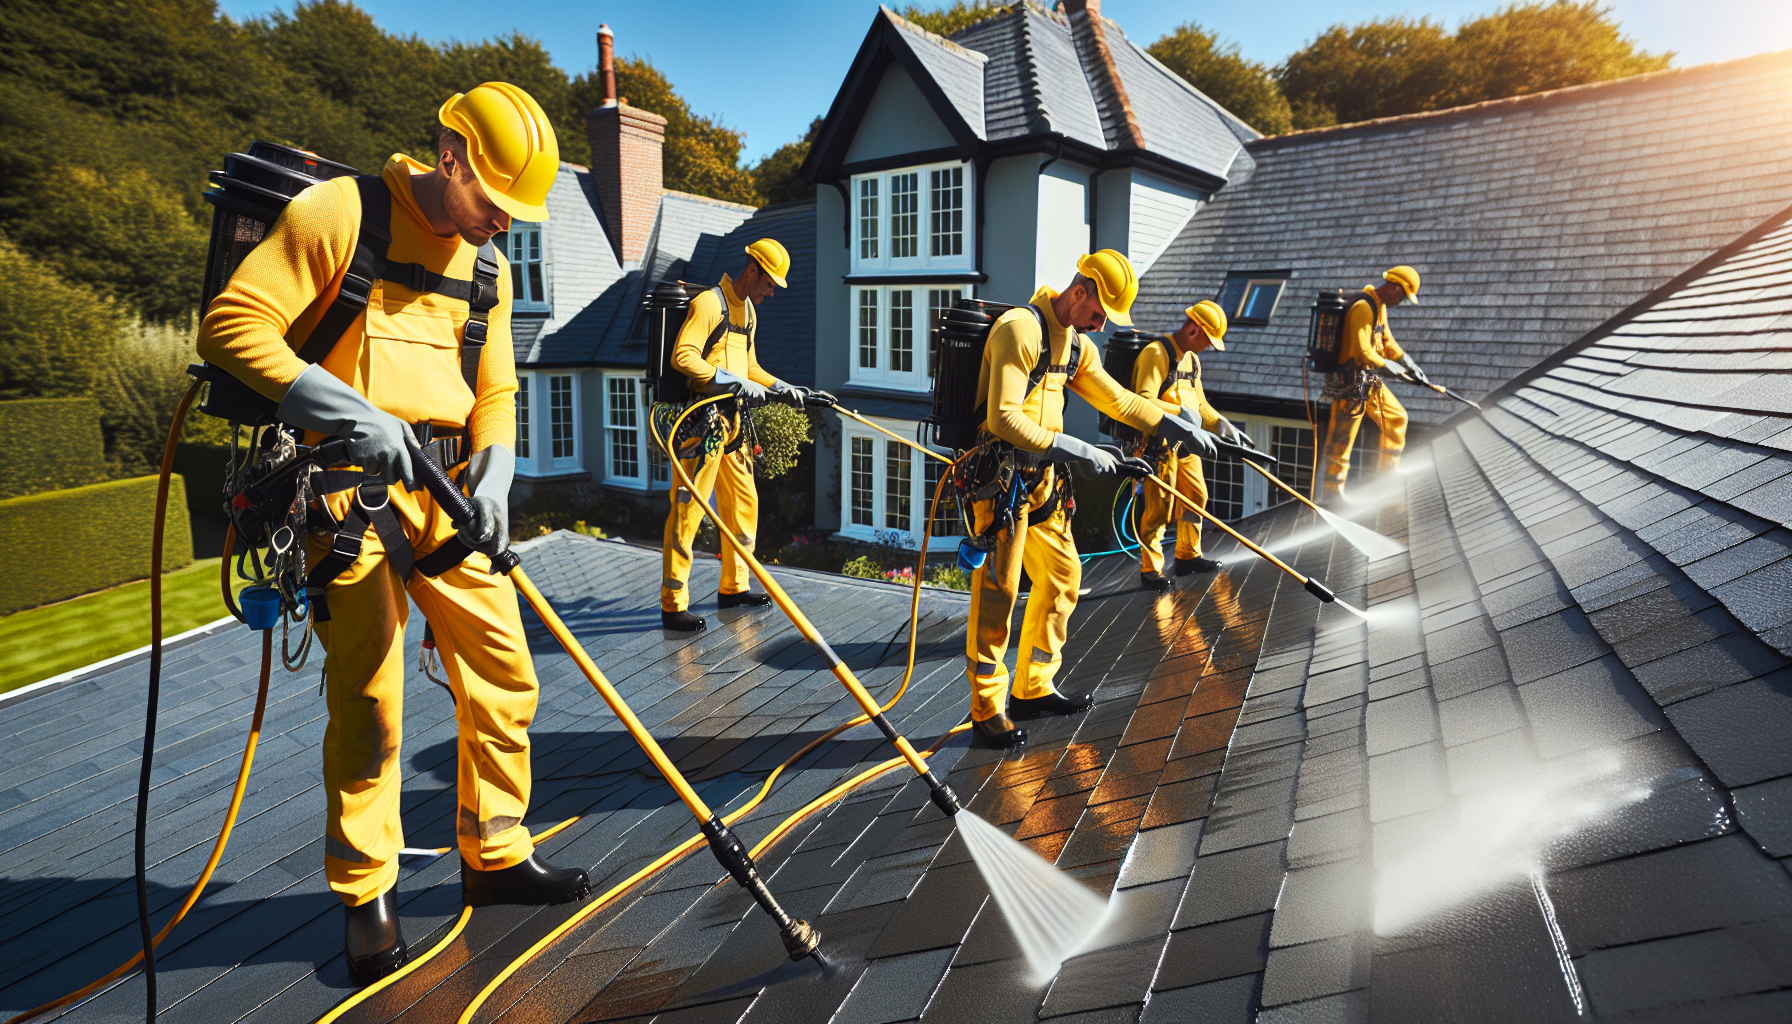 Illustration of a professional roof cleaning service in action